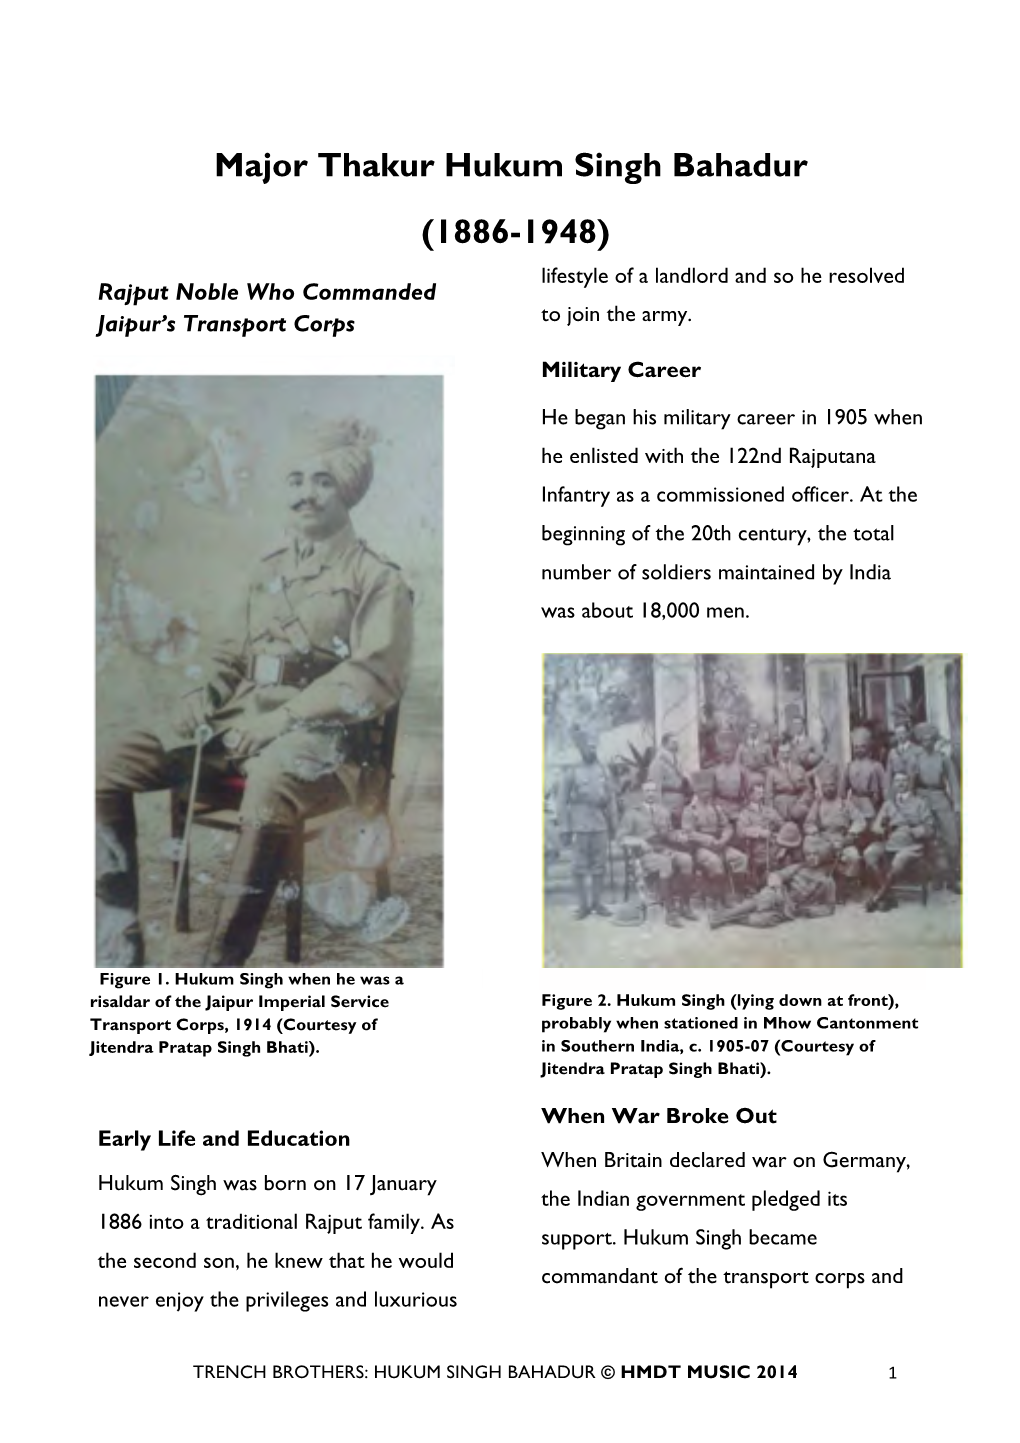 Major Thakur Hukum Singh Bahadur (1886-1948) Lifestyle of a Landlord and So He Resolved Rajput Noble Who Commanded Jaipur’S Transport Corps to Join the Army